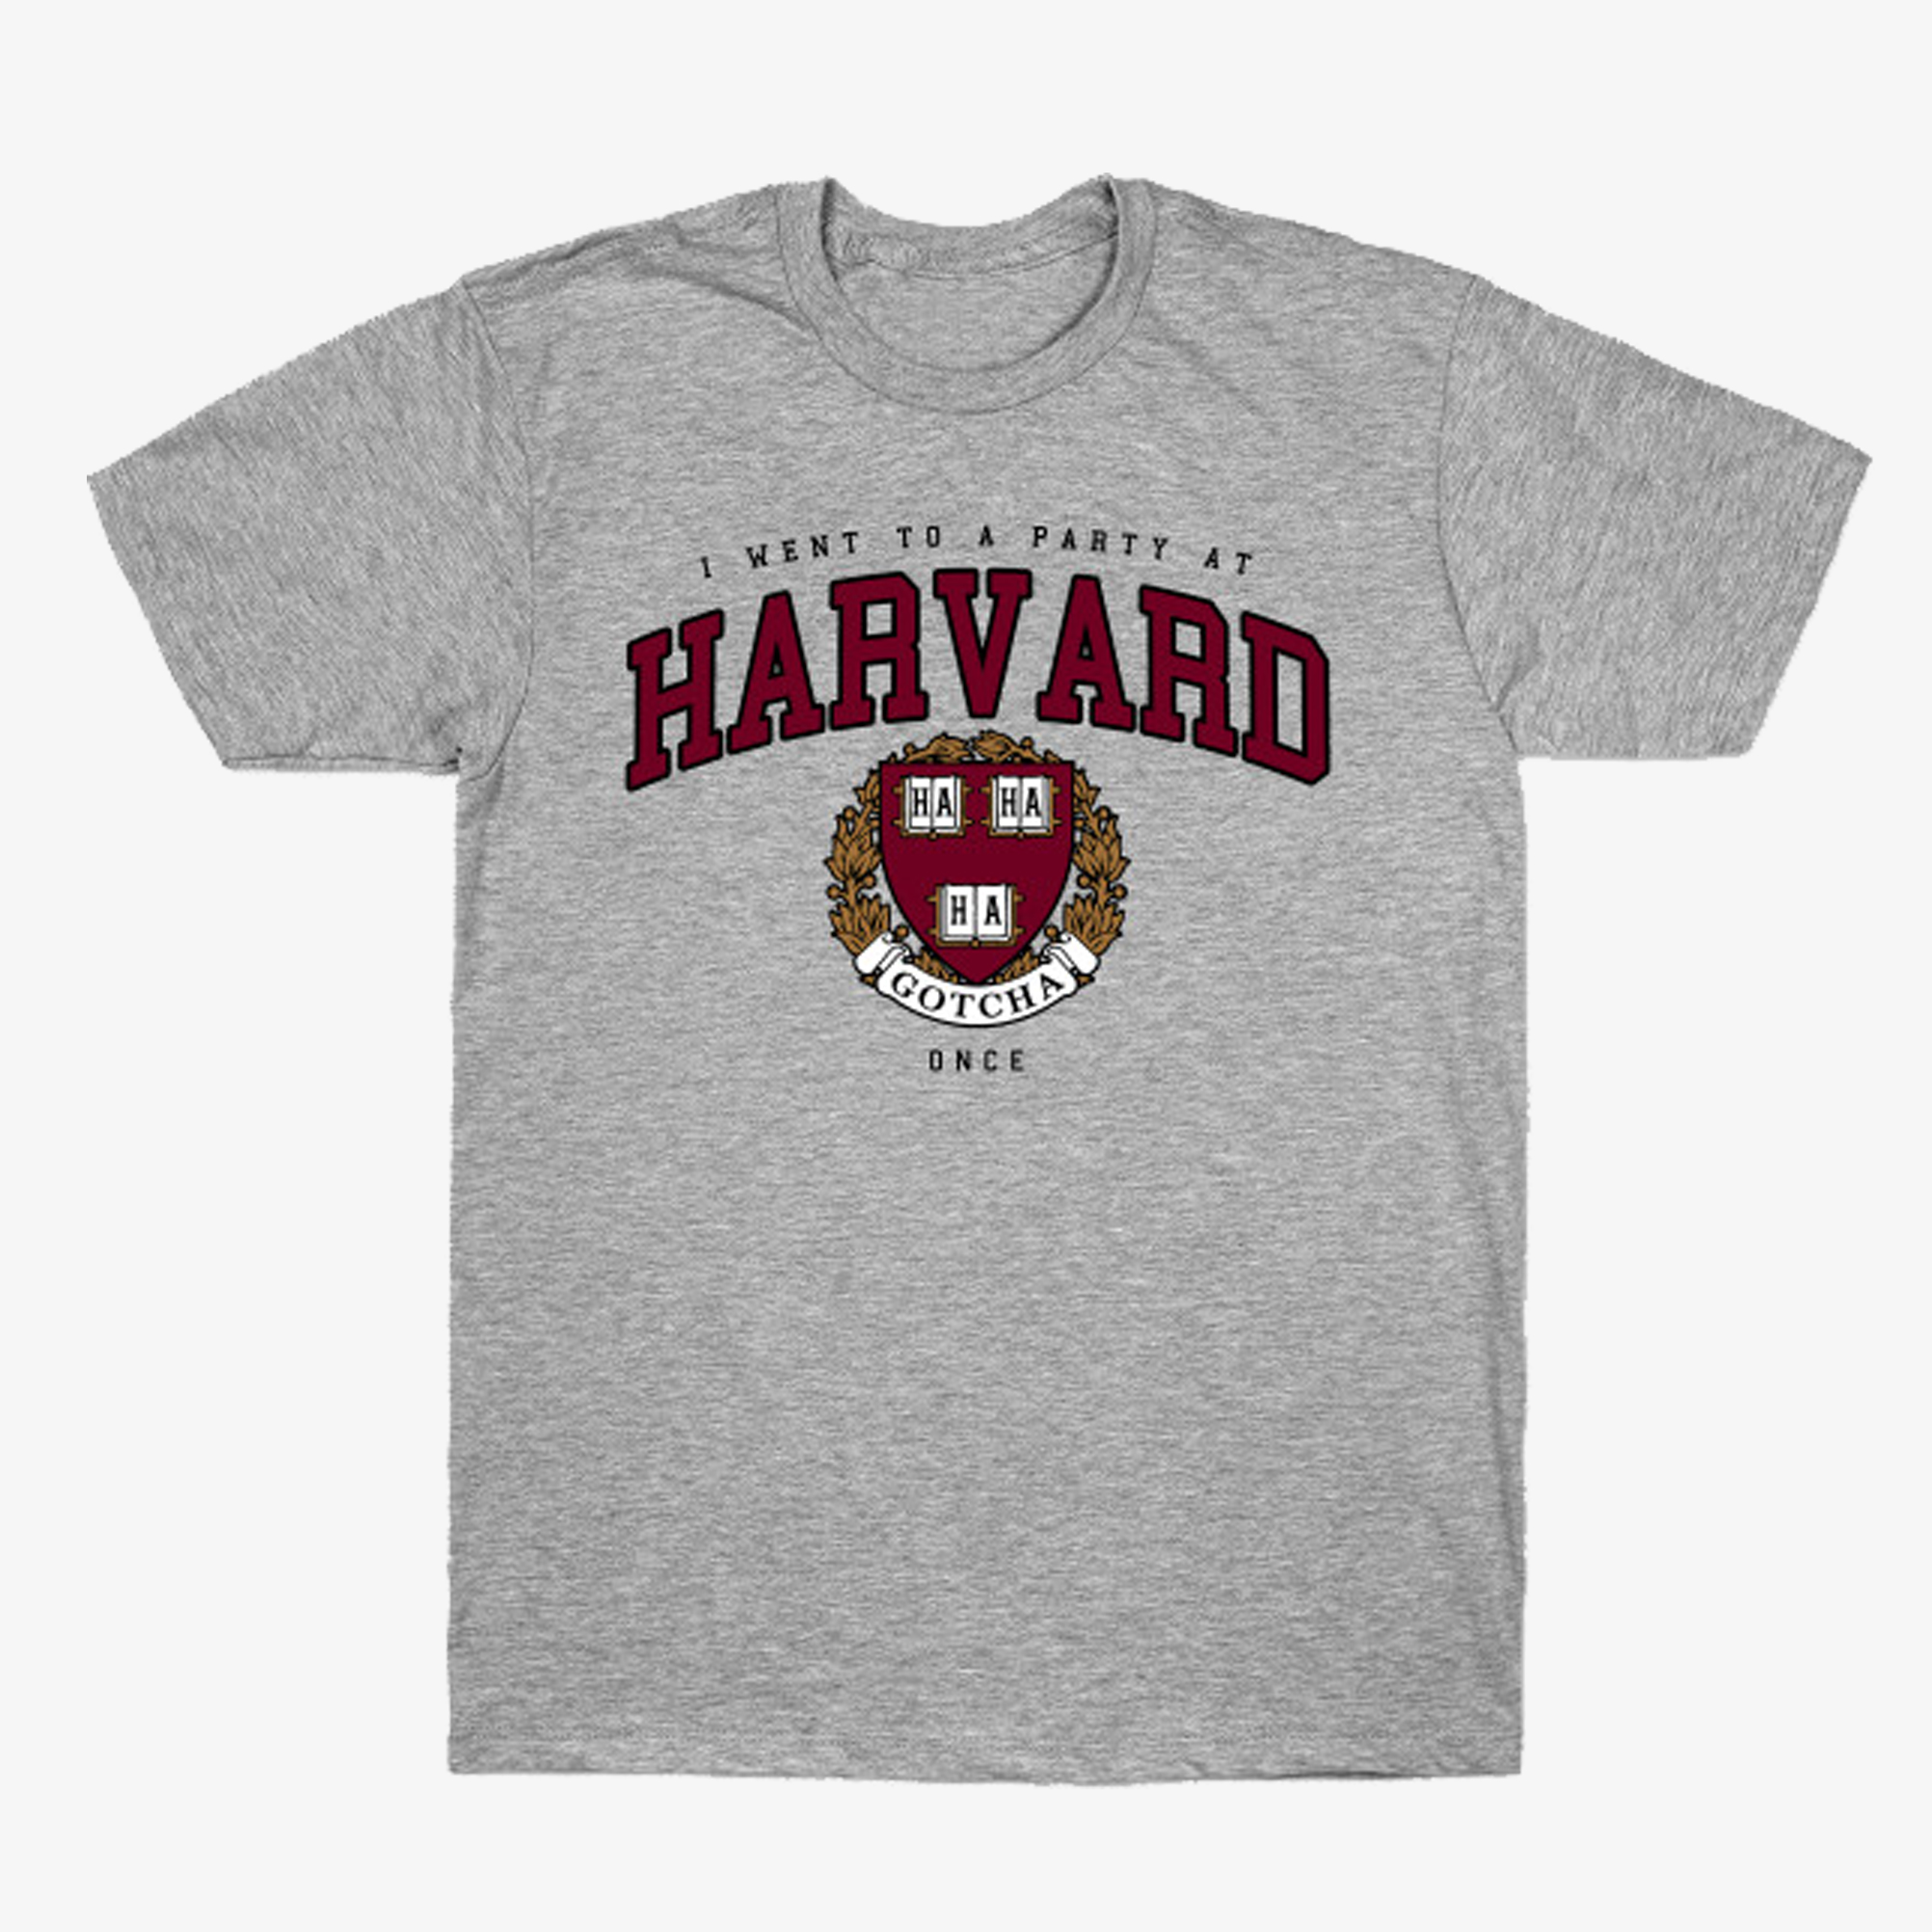 I Went To A Party At Harvard Once T shirt